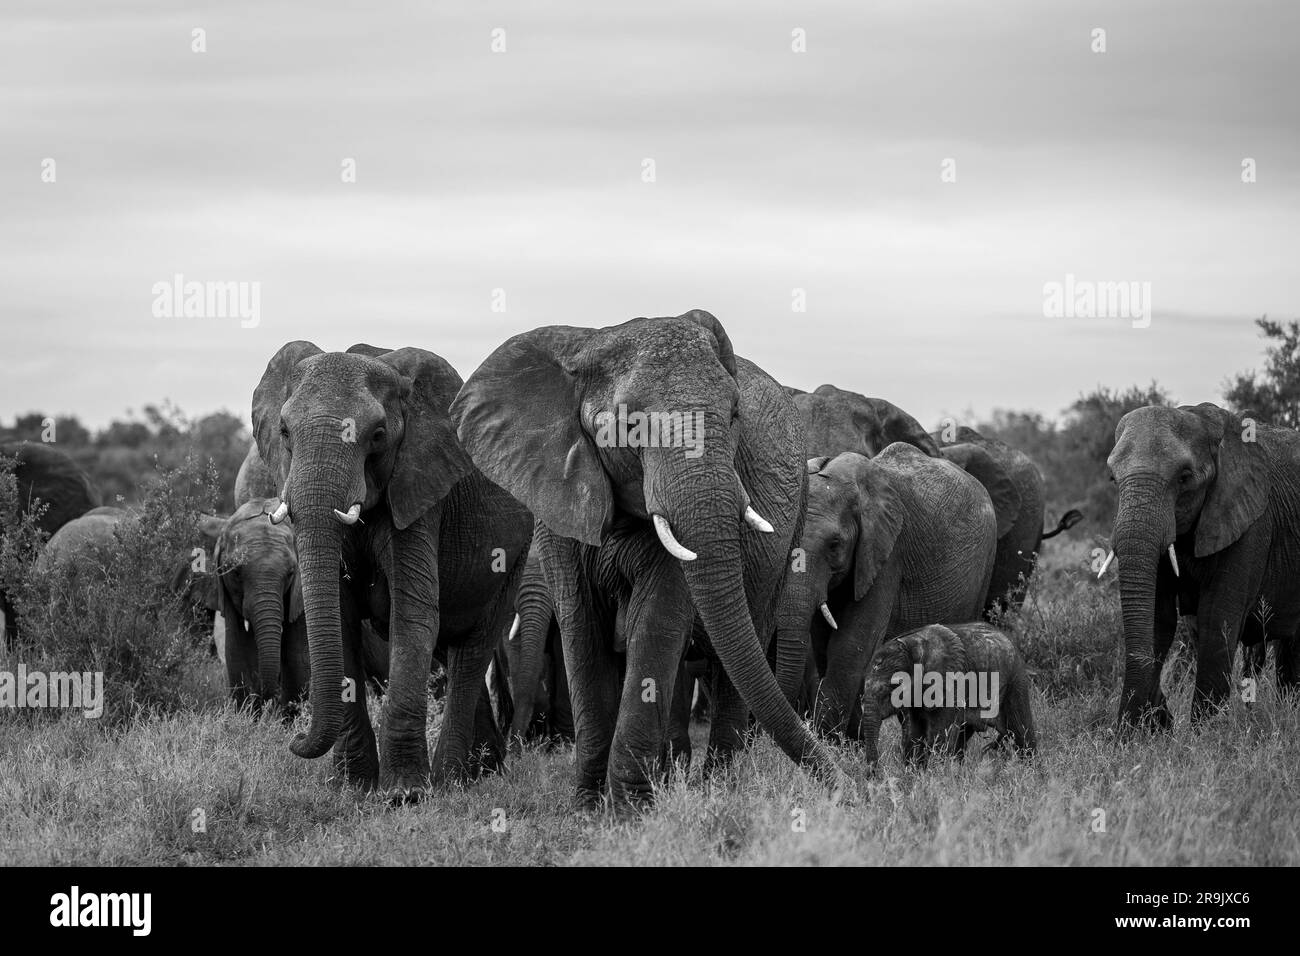 A herd of elephant, Loxodonta africana, walking through the grass, black and white image. Stock Photo